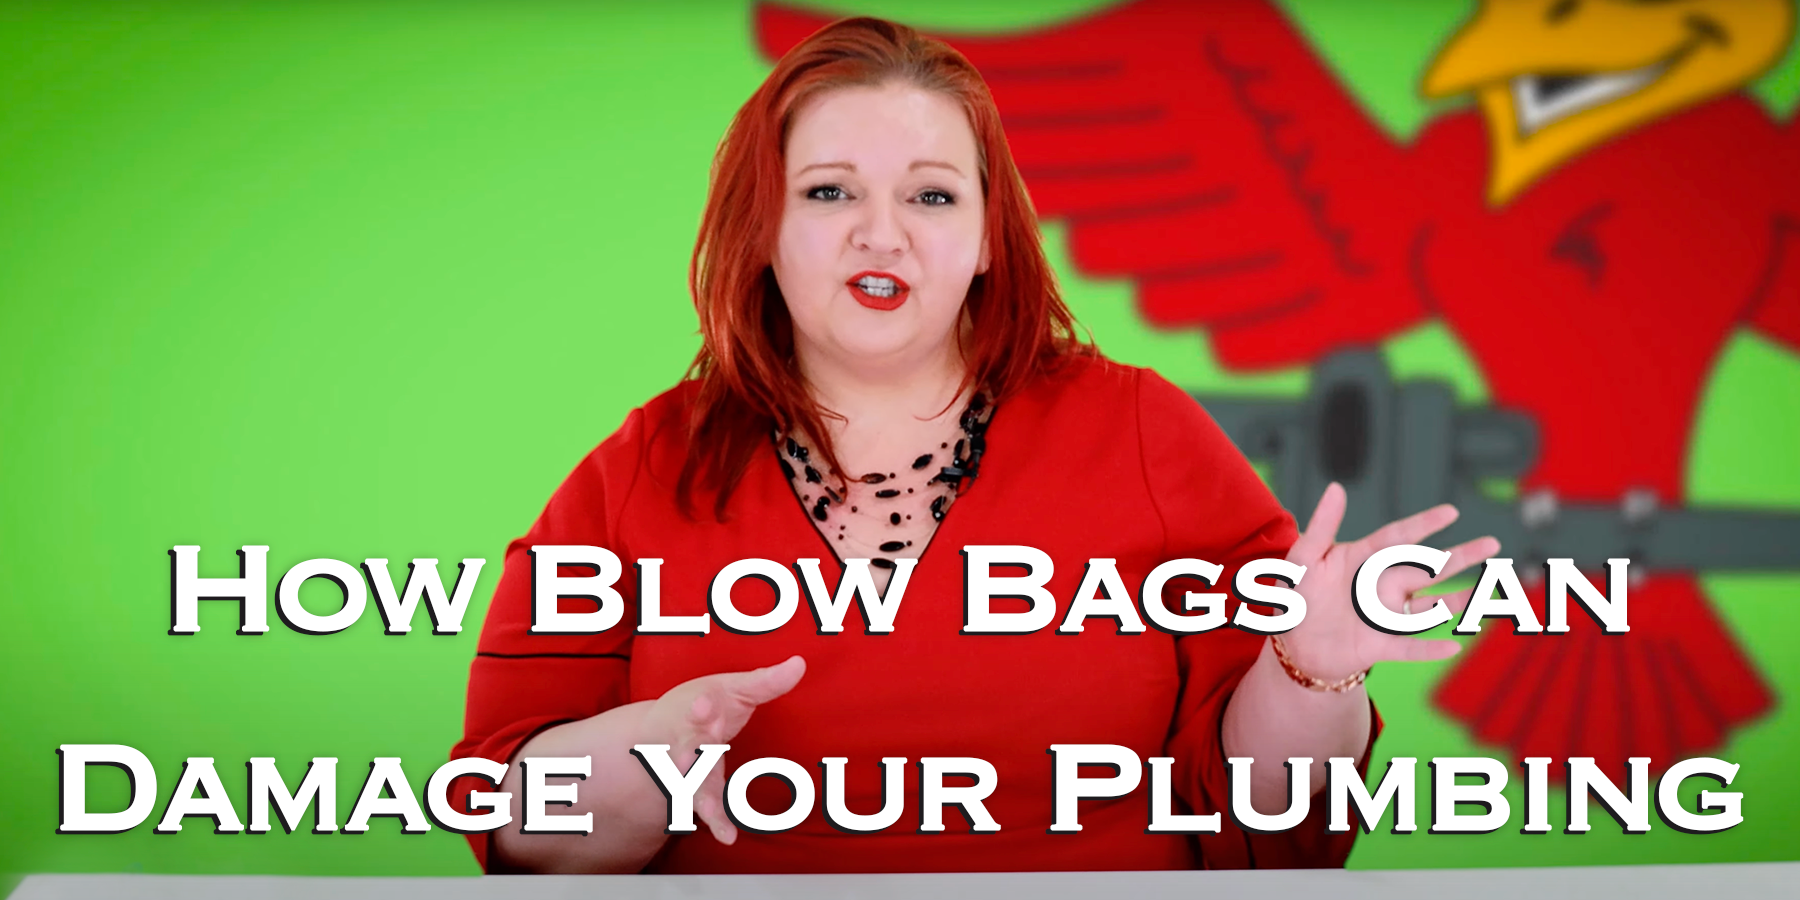 How Blow Bags Can Damage Your Plumbing